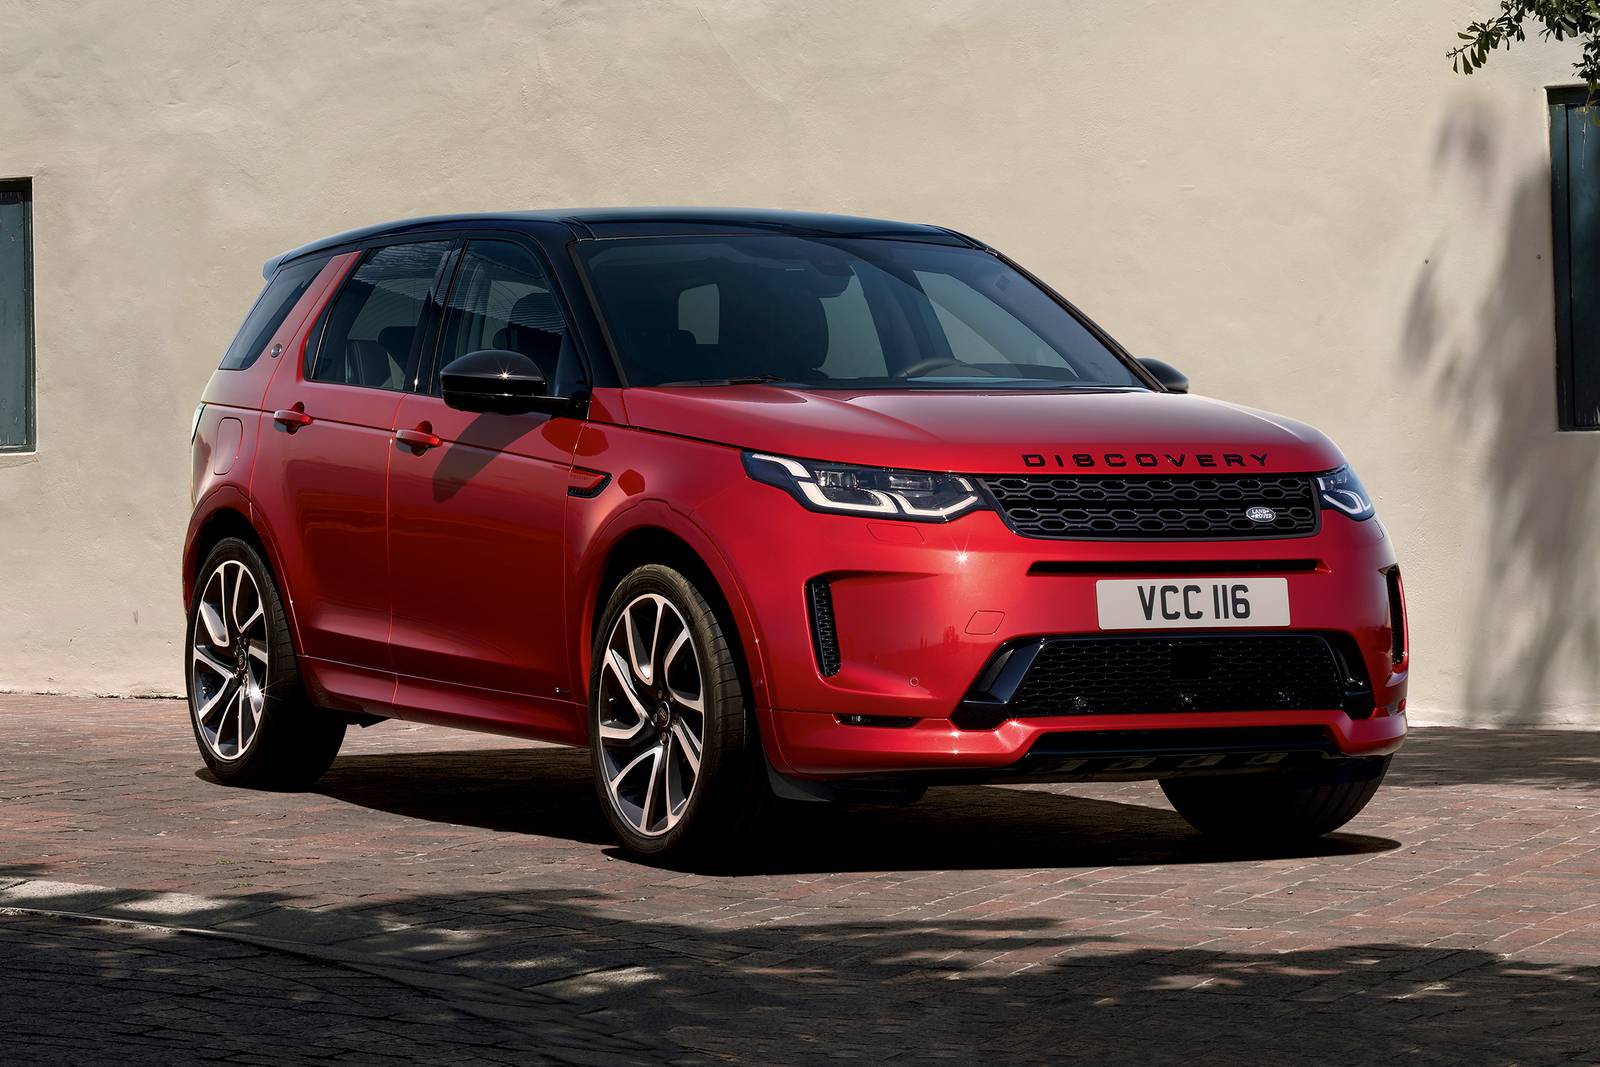 2020 Land Rover Discovery Sport Review & Ratings | Edmunds